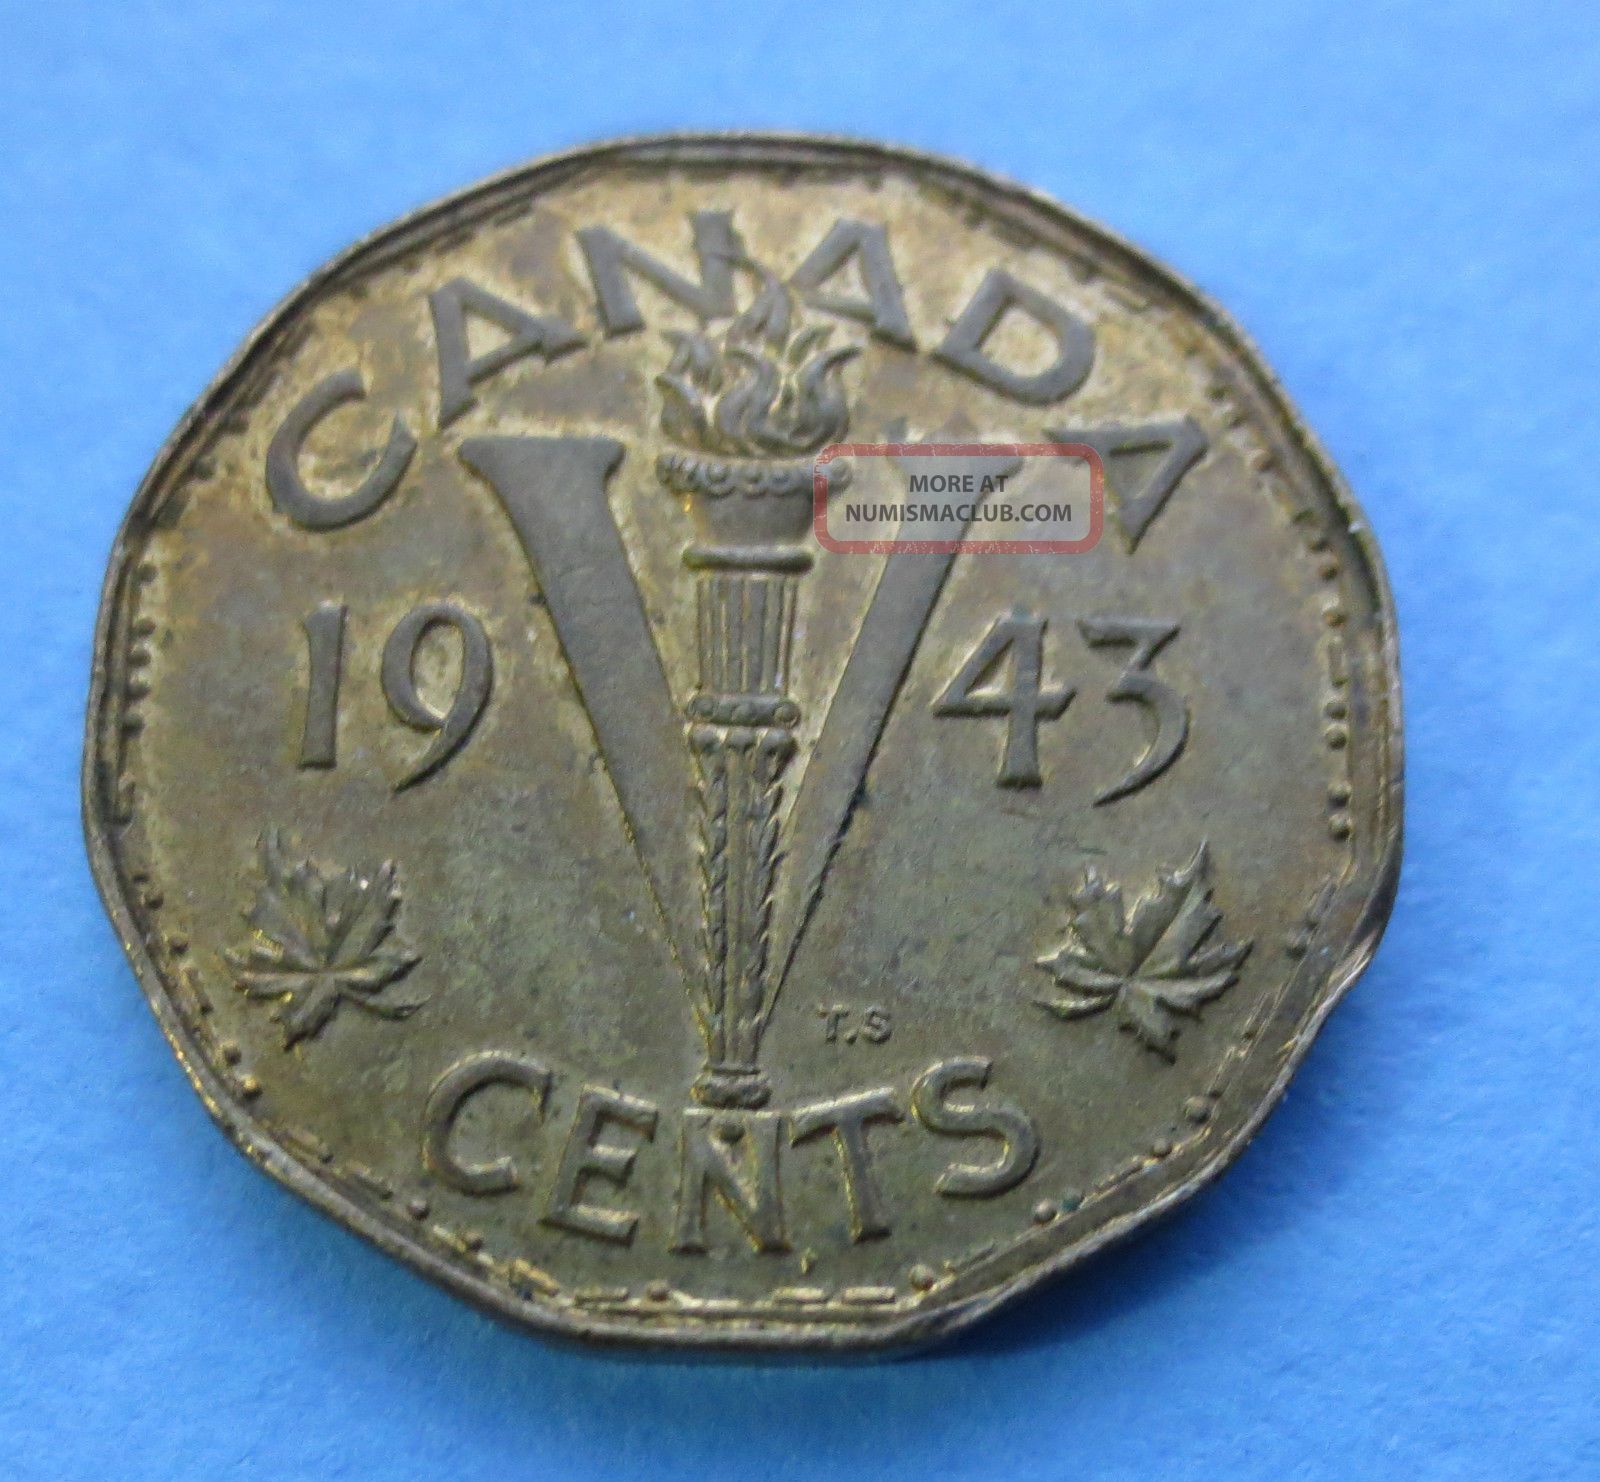 coins-and-canada-25-cents-1977-canadian-coins-price-guide-and-values